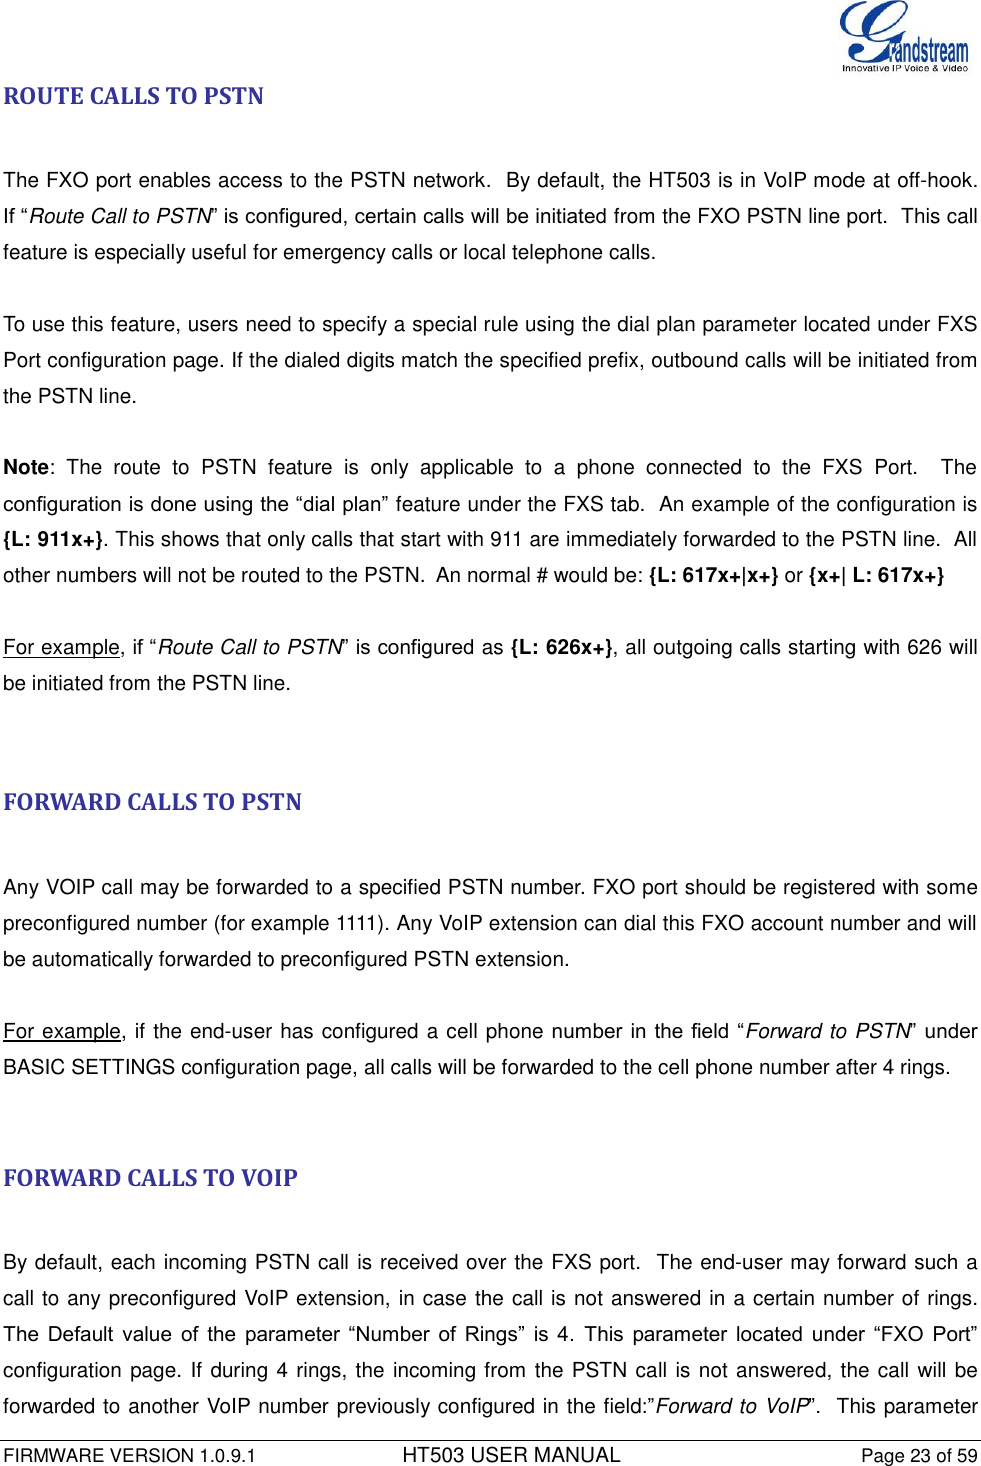  FIRMWARE VERSION 1.0.9.1          HT503 USER MANUAL Page 23 of 59       ROUTE CALLS TO PSTN  The FXO port enables access to the PSTN network.  By default, the HT503 is in VoIP mode at off-hook.  If “Route Call to PSTN” is configured, certain calls will be initiated from the FXO PSTN line port.  This call feature is especially useful for emergency calls or local telephone calls.   To use this feature, users need to specify a special rule using the dial plan parameter located under FXS Port configuration page. If the dialed digits match the specified prefix, outbound calls will be initiated from the PSTN line.  Note:  The  route  to  PSTN  feature  is  only  applicable  to  a  phone  connected  to  the  FXS  Port.    The configuration is done using the “dial plan” feature under the FXS tab.  An example of the configuration is {L: 911x+}. This shows that only calls that start with 911 are immediately forwarded to the PSTN line.  All other numbers will not be routed to the PSTN.  An normal # would be: {L: 617x+|x+} or {x+| L: 617x+}  For example, if “Route Call to PSTN” is configured as {L: 626x+}, all outgoing calls starting with 626 will be initiated from the PSTN line.   FORWARD CALLS TO PSTN  Any VOIP call may be forwarded to a specified PSTN number. FXO port should be registered with some preconfigured number (for example 1111). Any VoIP extension can dial this FXO account number and will be automatically forwarded to preconfigured PSTN extension.  For example, if the end-user has configured a cell phone number in the  field “Forward to PSTN”  under BASIC SETTINGS configuration page, all calls will be forwarded to the cell phone number after 4 rings.    FORWARD CALLS TO VOIP  By default, each incoming PSTN call is received over the FXS port.  The end-user may forward such a call to any preconfigured VoIP extension, in case the call is not answered in a certain number of rings. The  Default  value  of  the  parameter  “Number  of  Rings”  is  4.  This  parameter  located  under  “FXO  Port” configuration page. If during 4 rings, the incoming from the PSTN call is not answered, the call will be forwarded to another VoIP number previously configured in the field:”Forward to VoIP”.  This parameter 